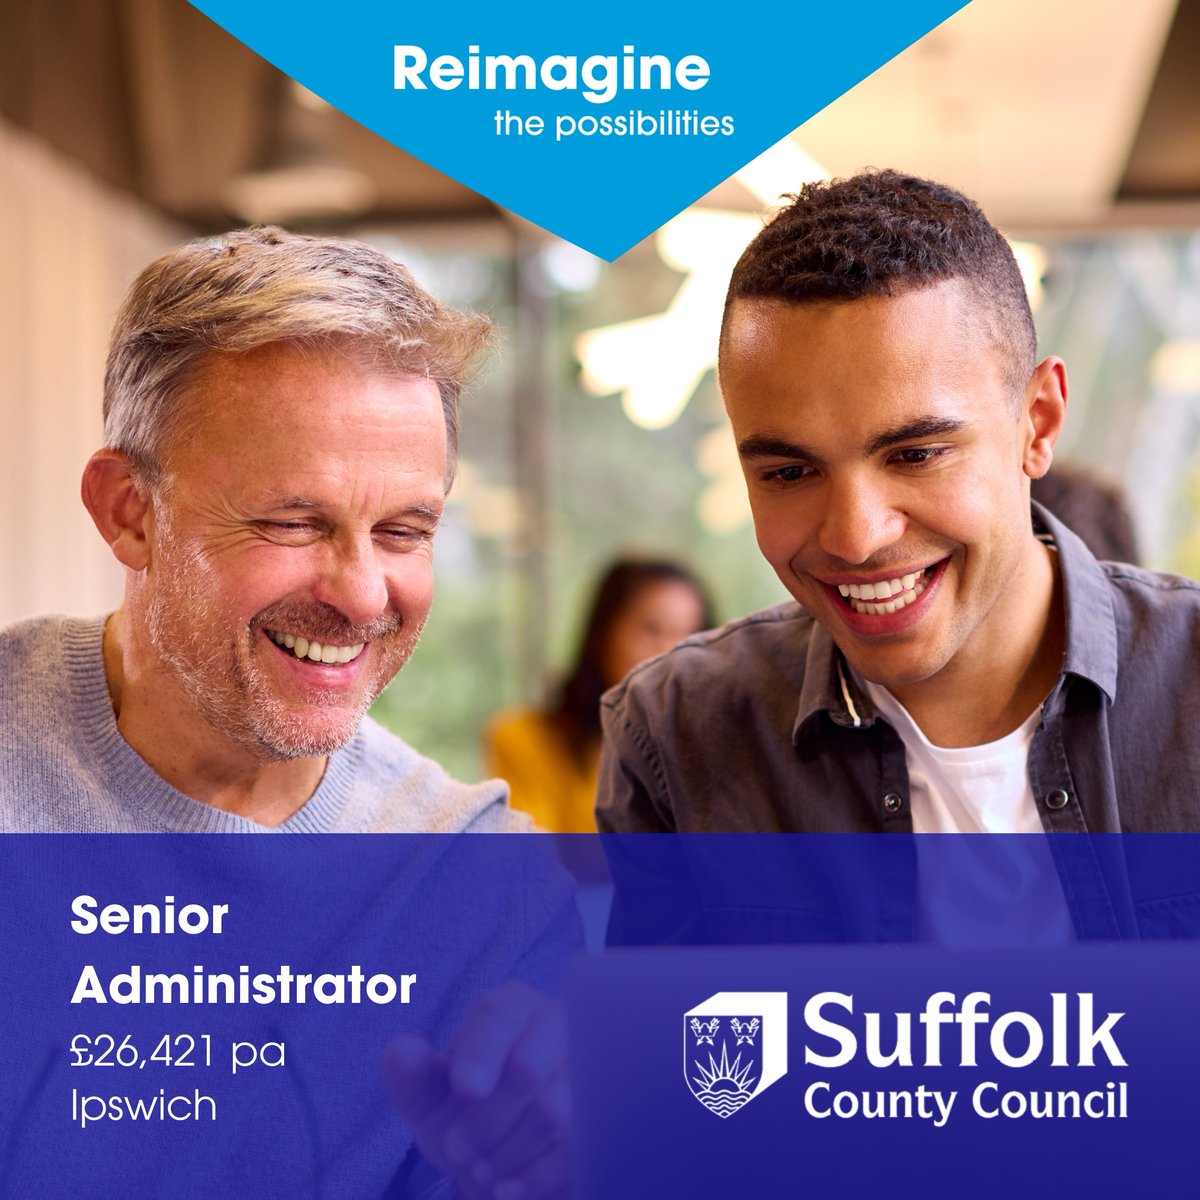 Family Services Assistant Coordinator
@Suffolkcc - Ipswich, IP1 2BX / Hybrid 
£26,421 pa (pro rata if P/T)
37 hpw, Flexible working, Permanent 

For more info and to apply for this job, visit:
suffolkjobsdirect.org/#en/sites/CX_1…

#SuffolkJobs #suffolkjobsdirect